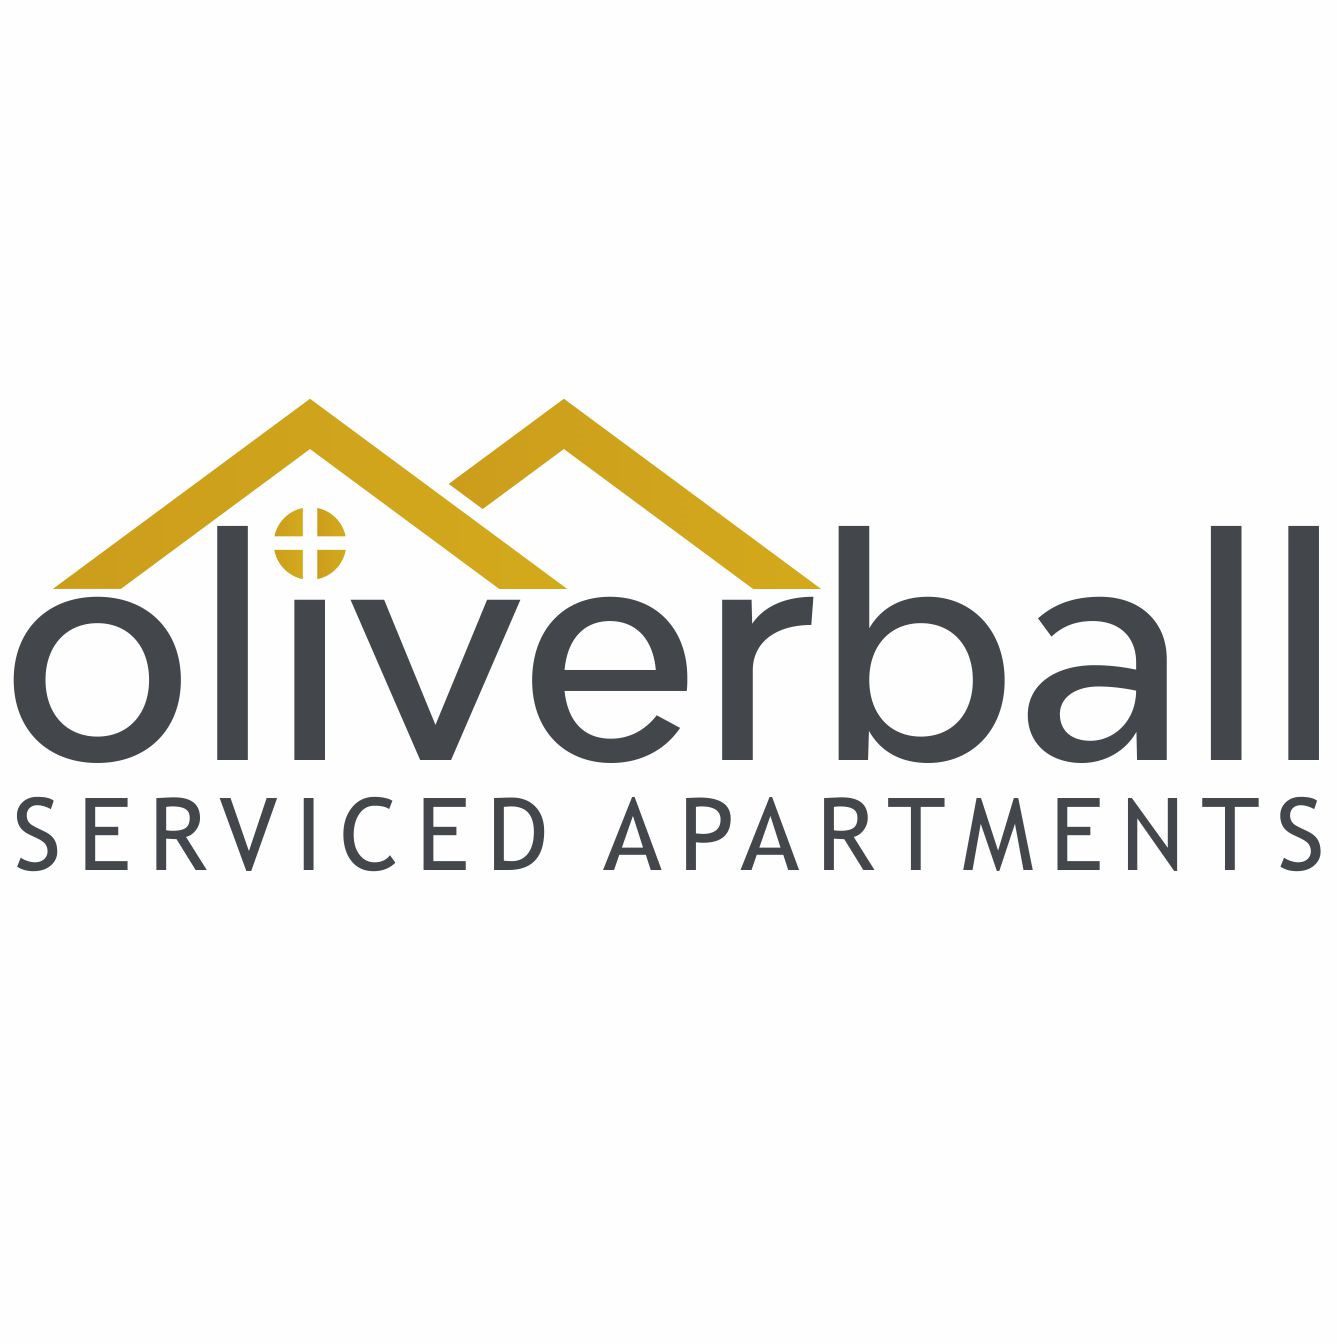 Oliverball Serviced Apartments - Short stays and corporate accommodation in Portsmouth